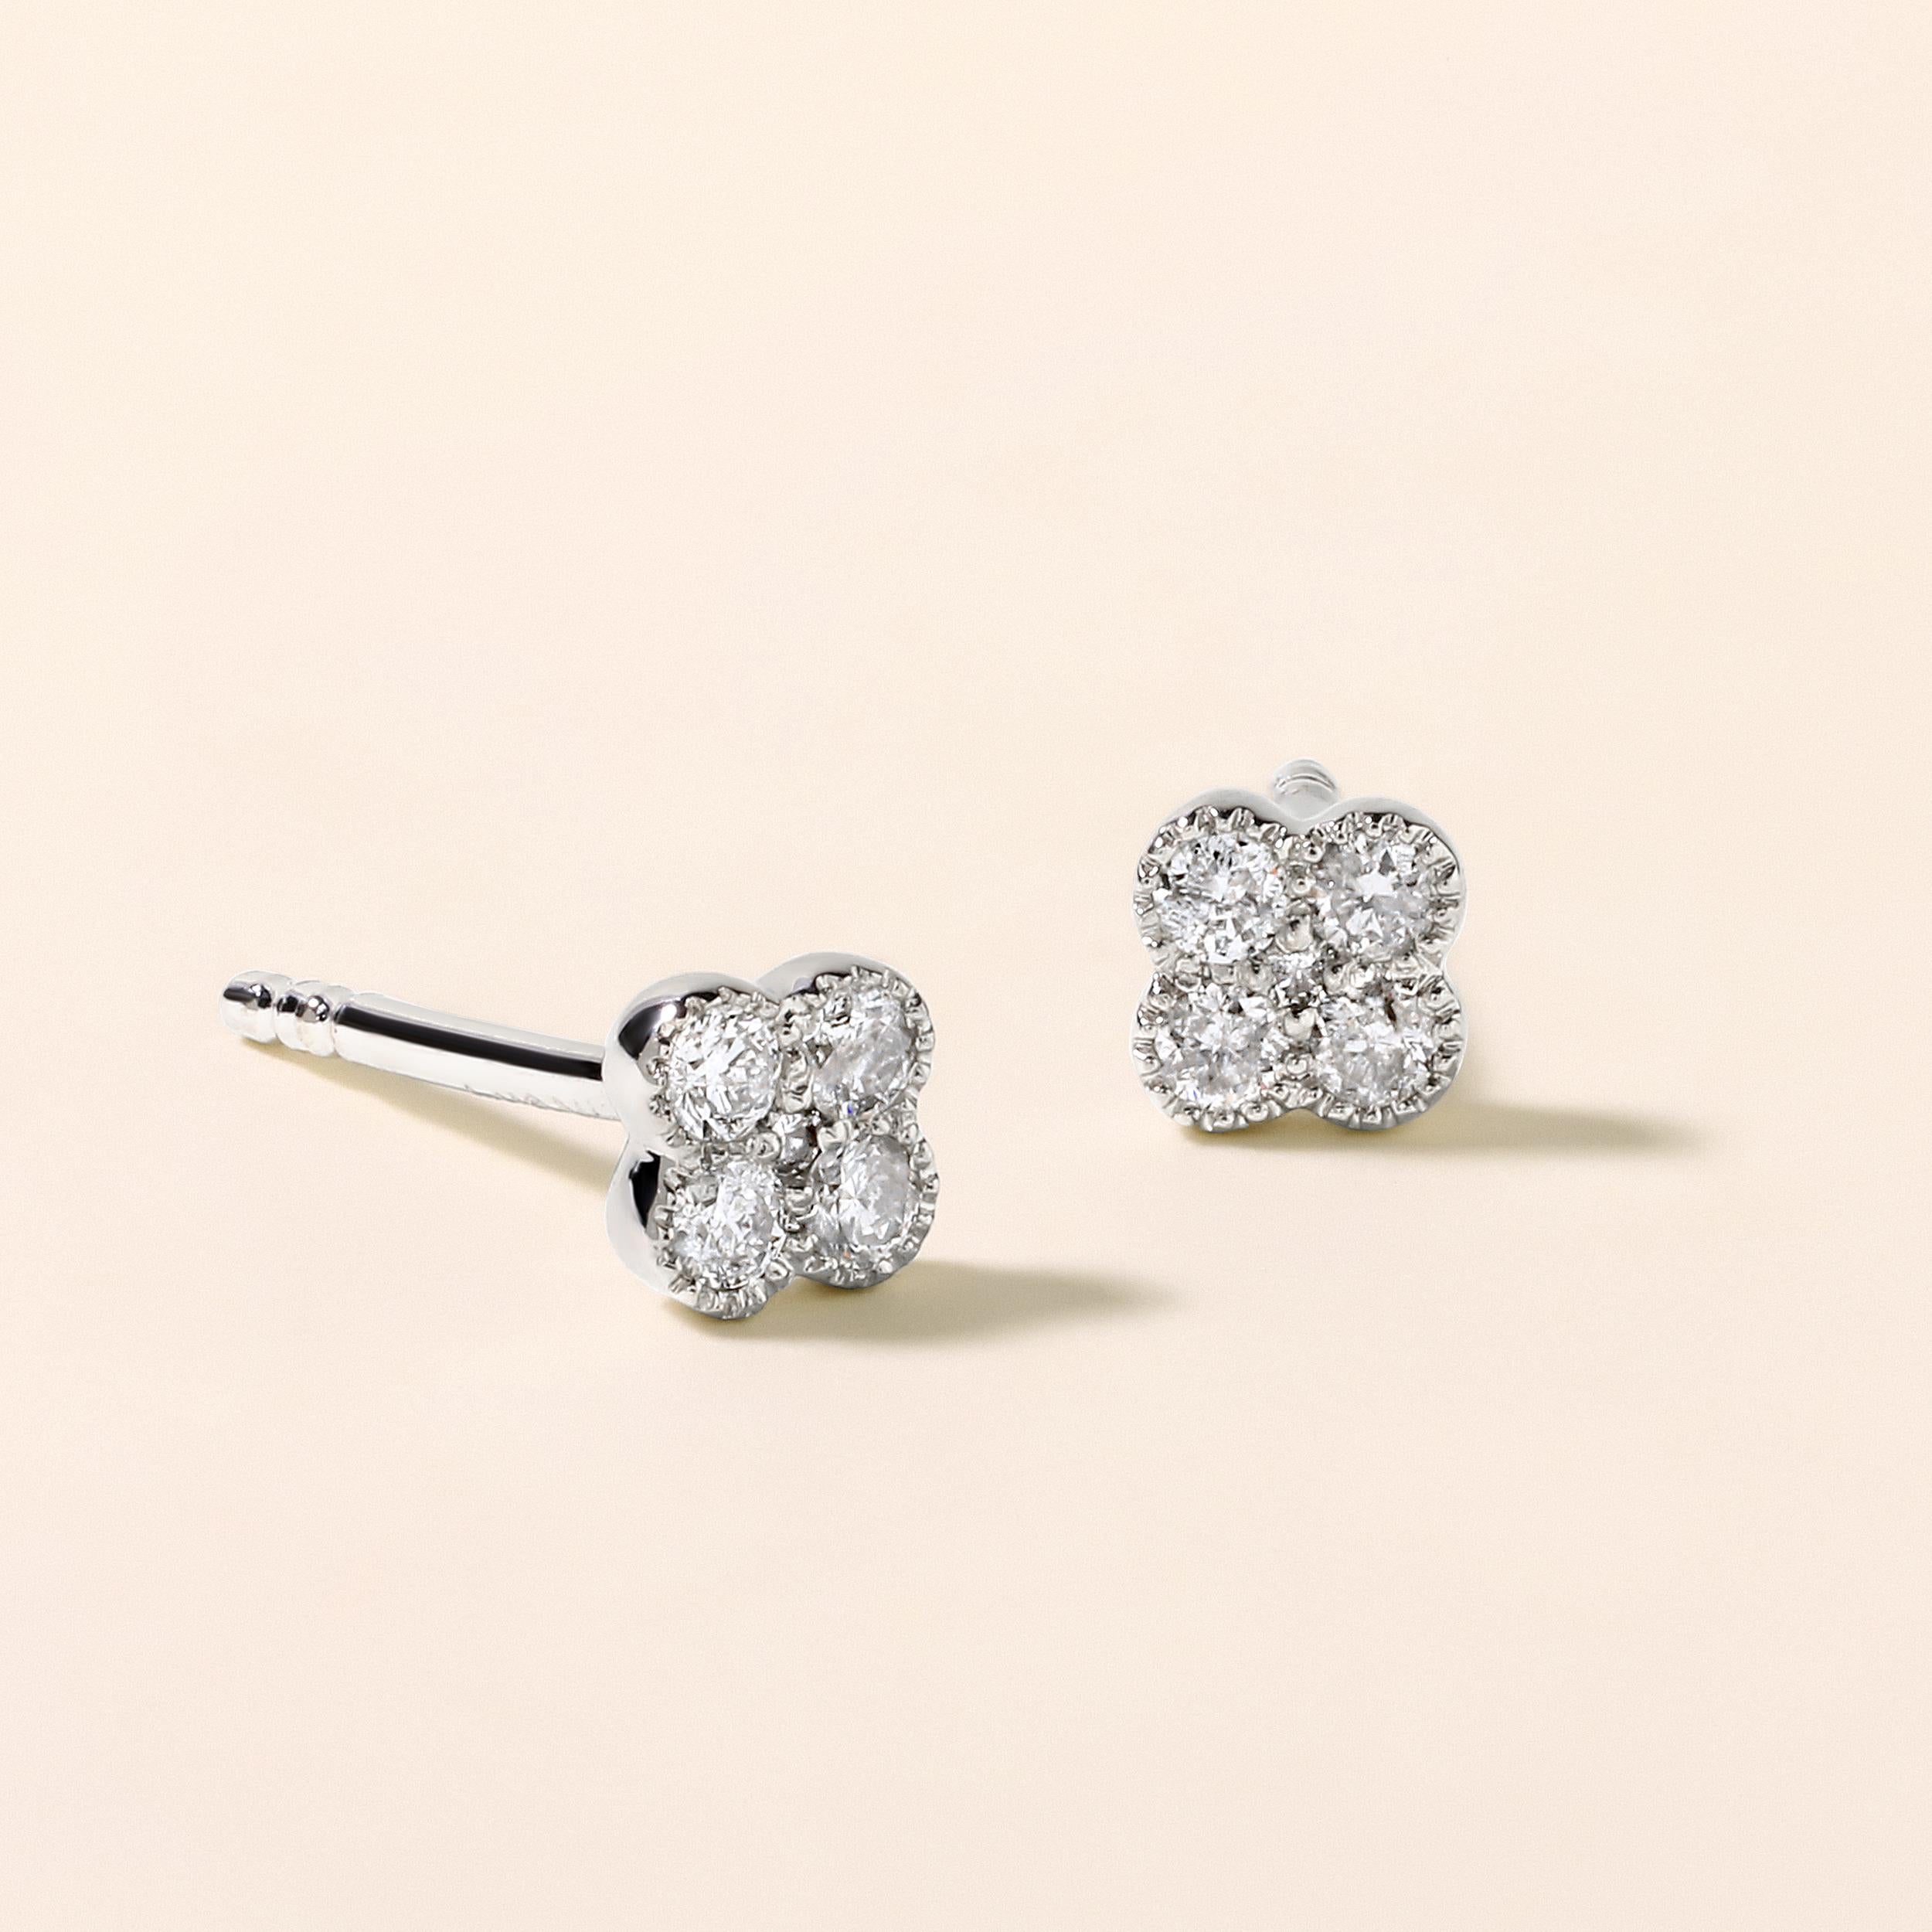 Crafted in 0.79 grams of 14K White Gold, the earrings contains 10 stones of Round Diamonds with a total of 0.14 carat in F-G color and I1-I2 clarity.
This jewelry piece will be expertly crafted by our skilled artisans upon order. Allow us a shipping